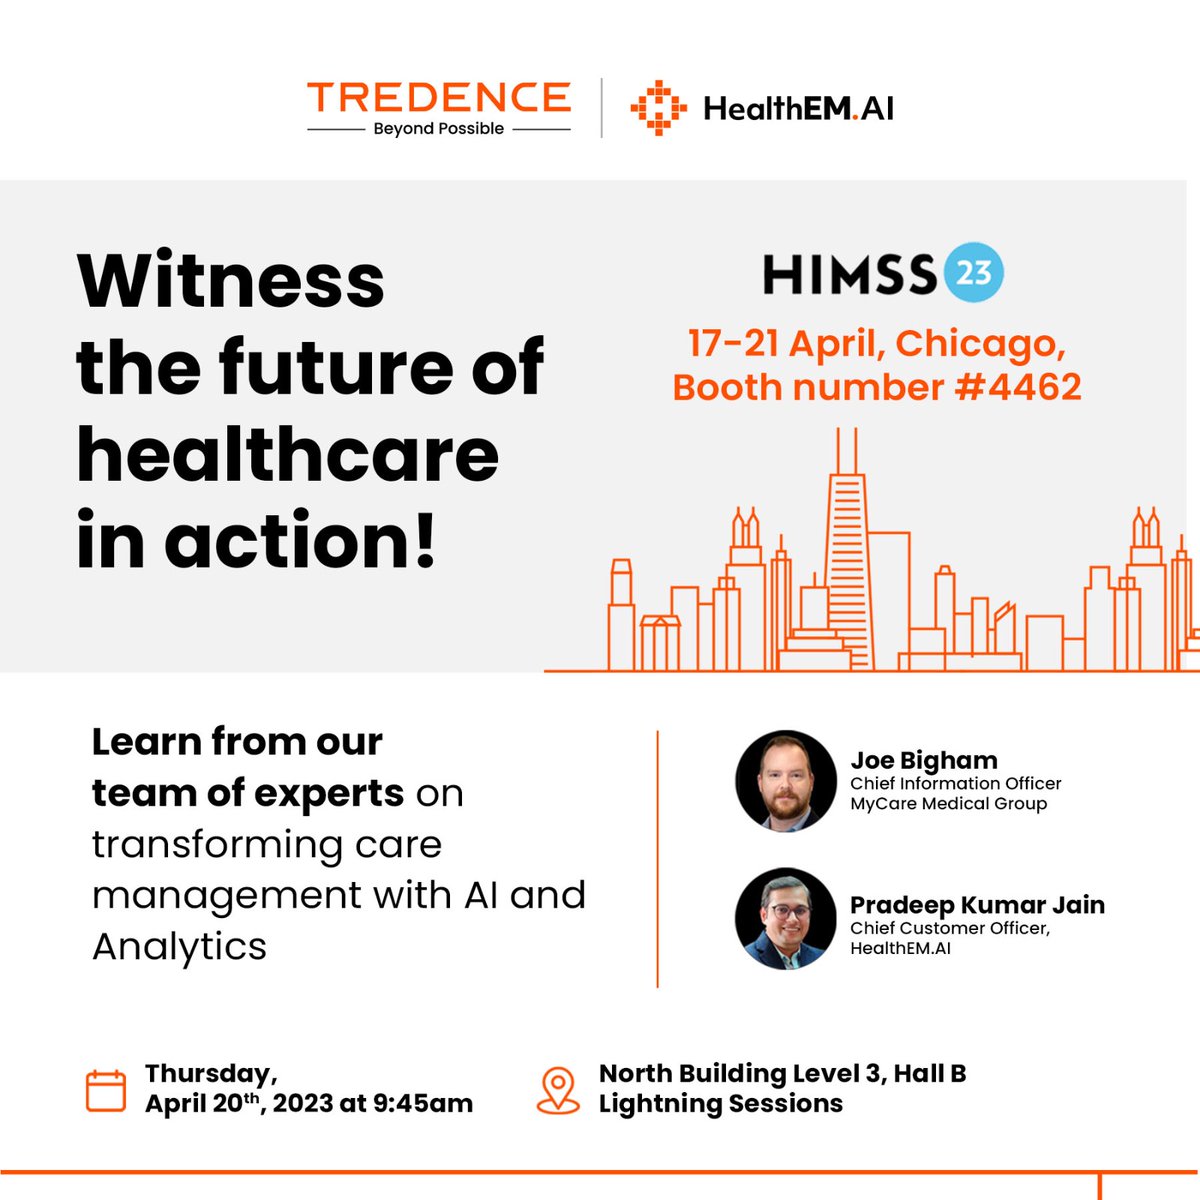 Join us at #HIMSS23 and take the next step towards data-driven healthcare. Let's work together to make a difference in patients' lives!
Check out our website for more details: lnkd.in/di9_XNDC
#AIanalytics #PatientCare #Tredence #caremanagement #aiforhealth